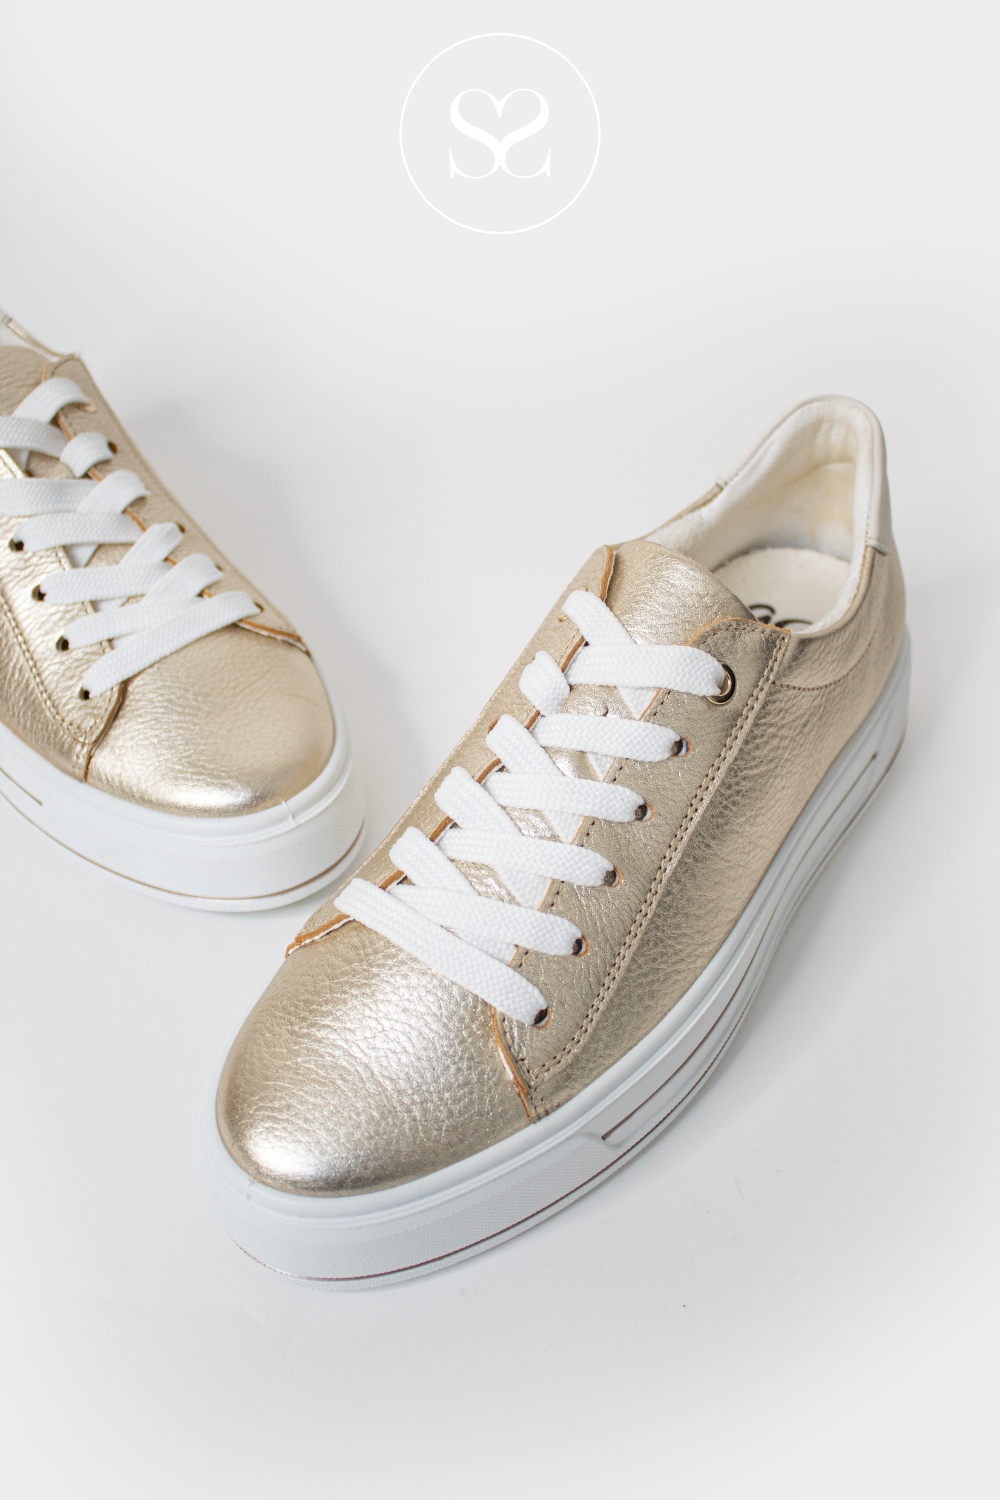 ARA 12-23002 GOLD LEATHER NEAT FLATFORM TRAINERS WITH WHITE SOLE AND LACES